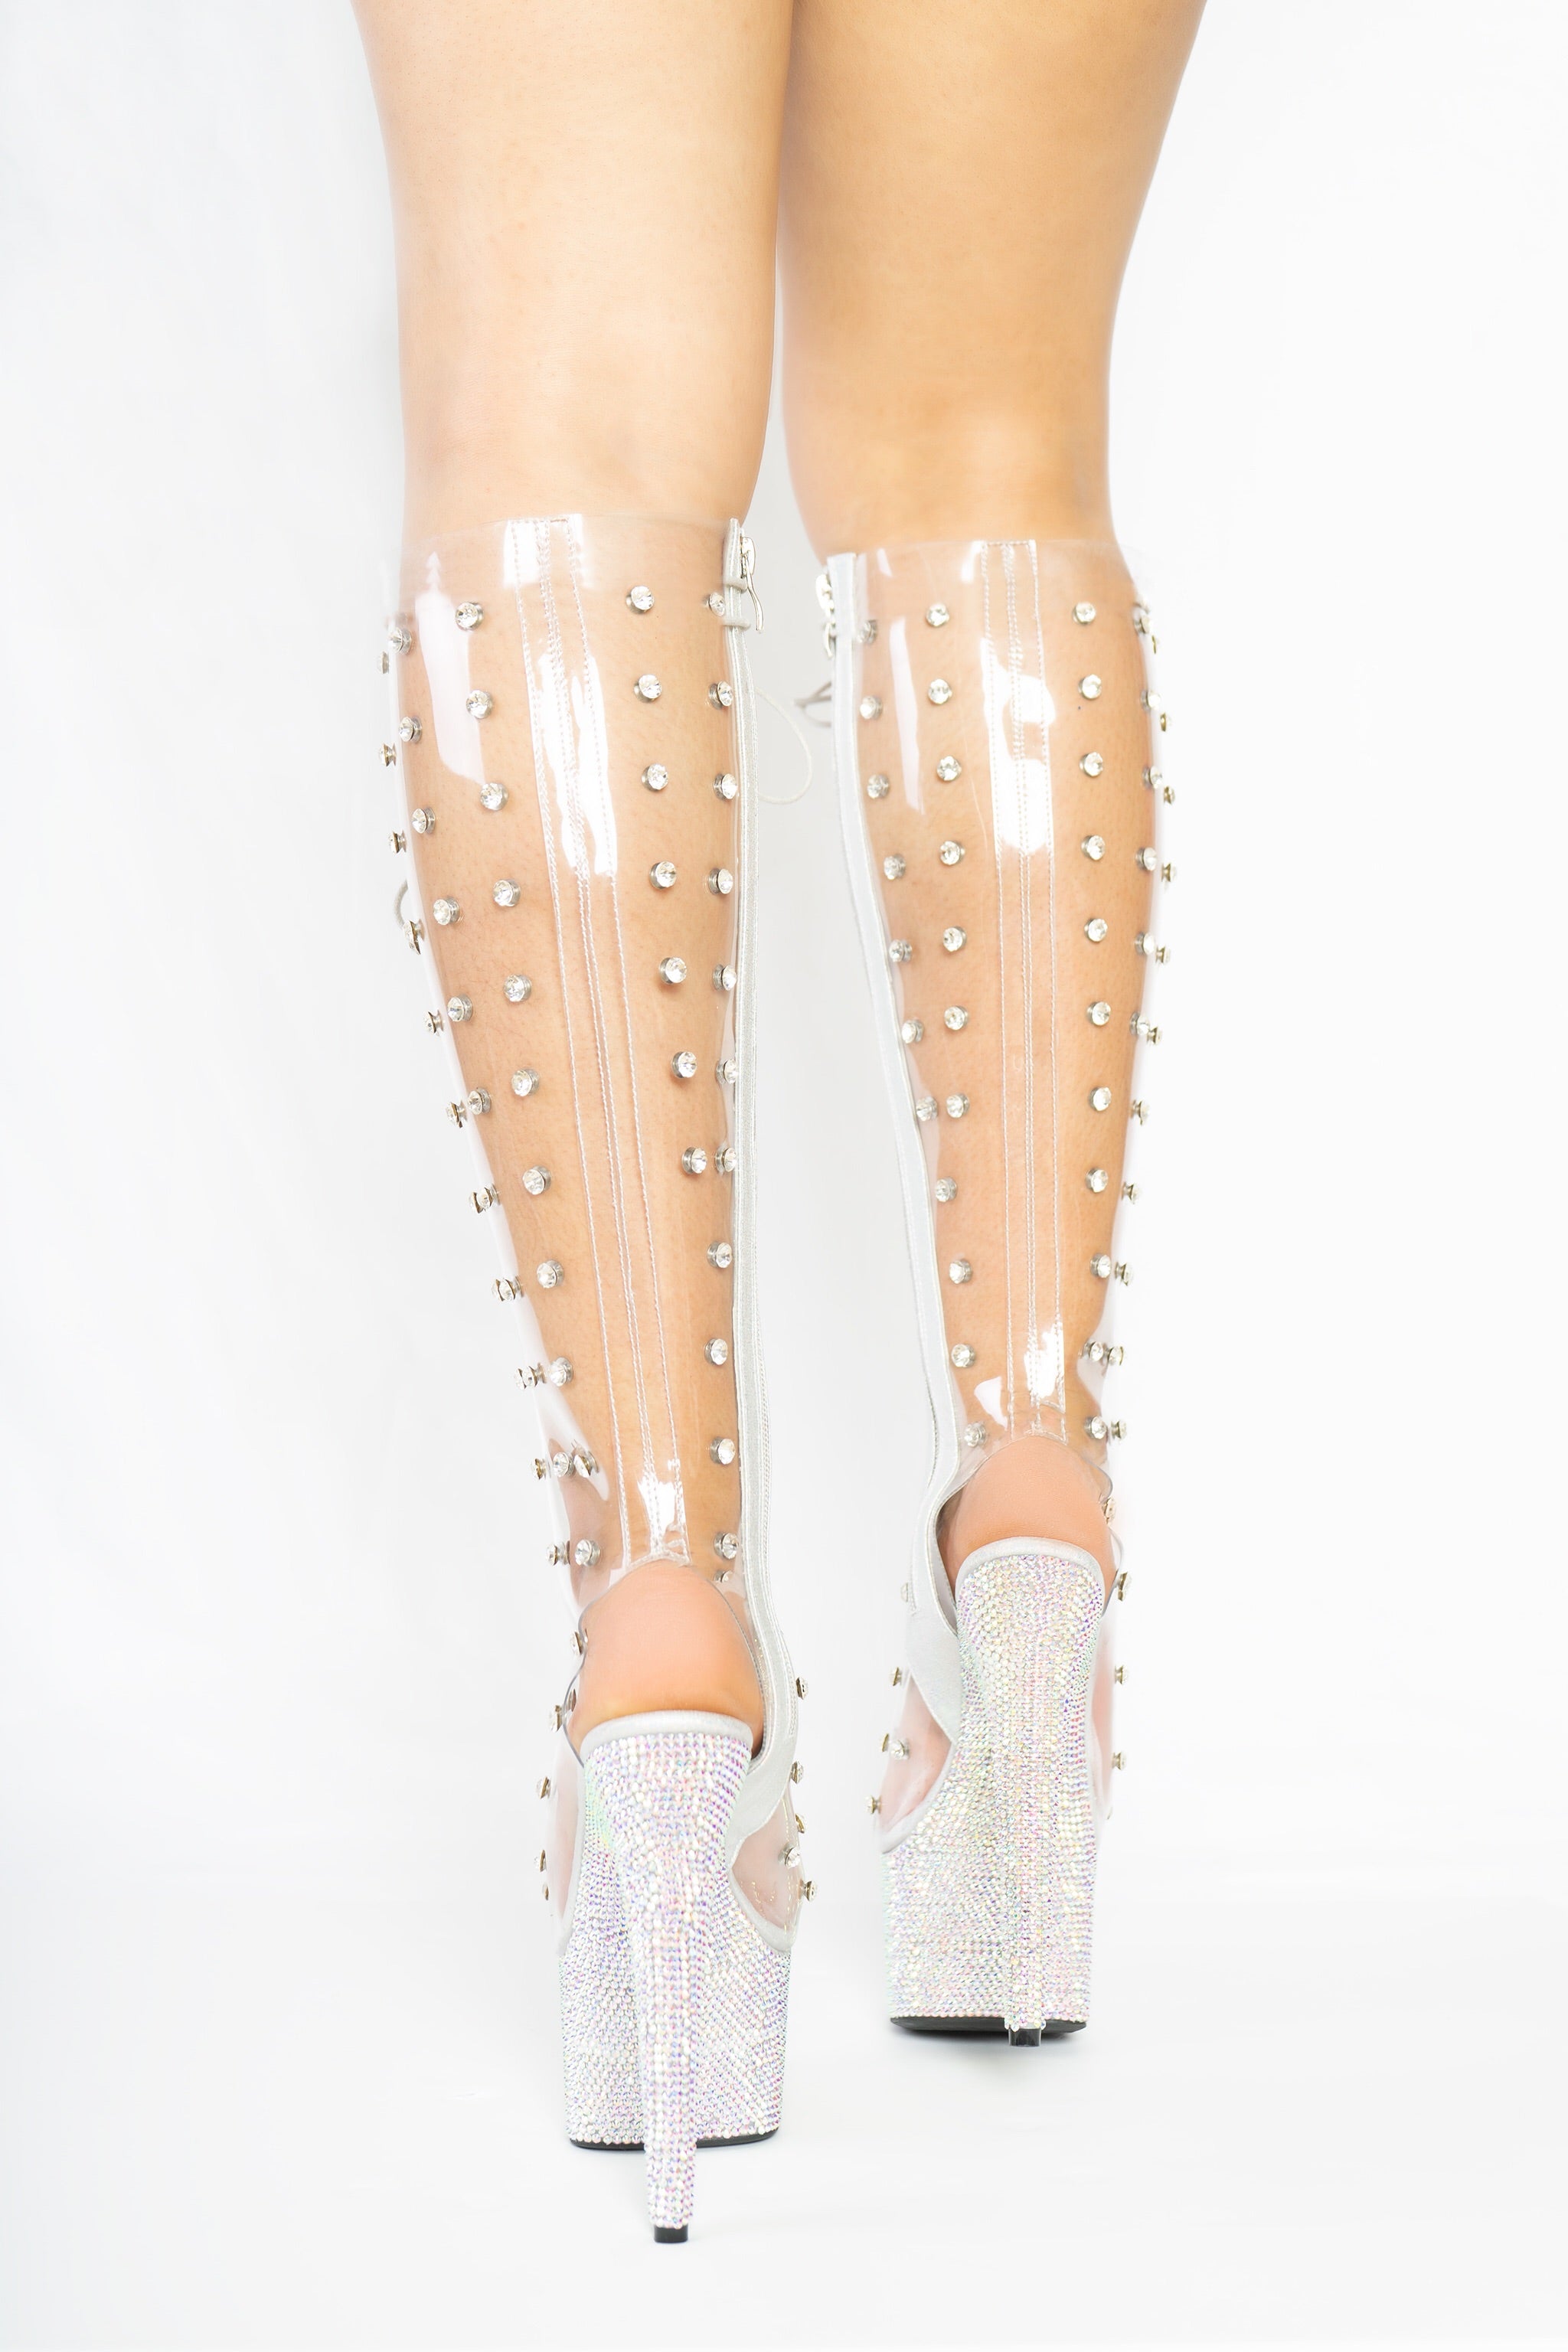 Iced Out lace up - The Beauty Cave Boutique